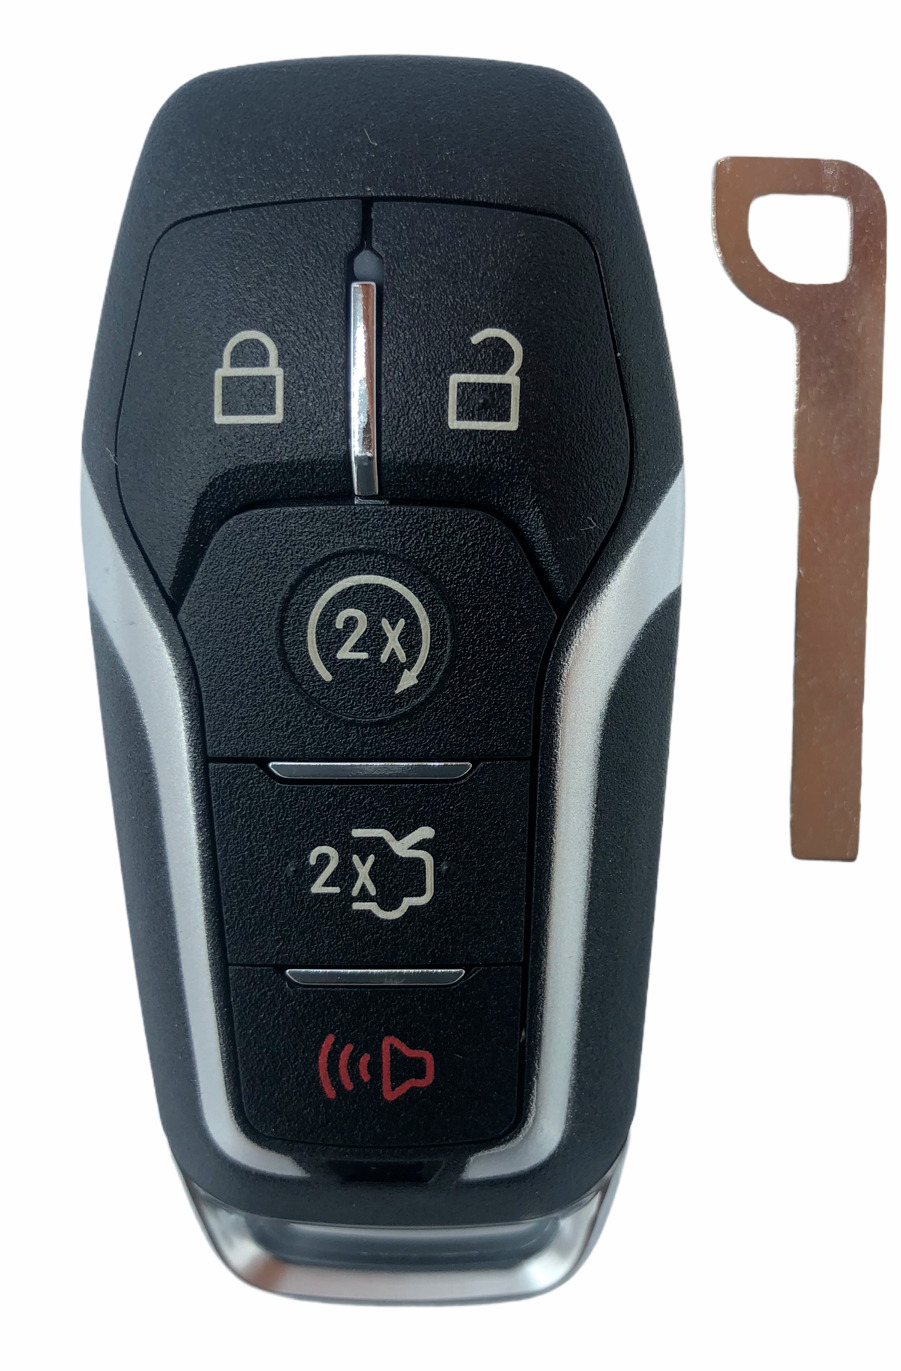 For Lincoln MKC MKX MKZ Smart Remote Key Fob M3N-A2C31243300 902MHz 164-R7991